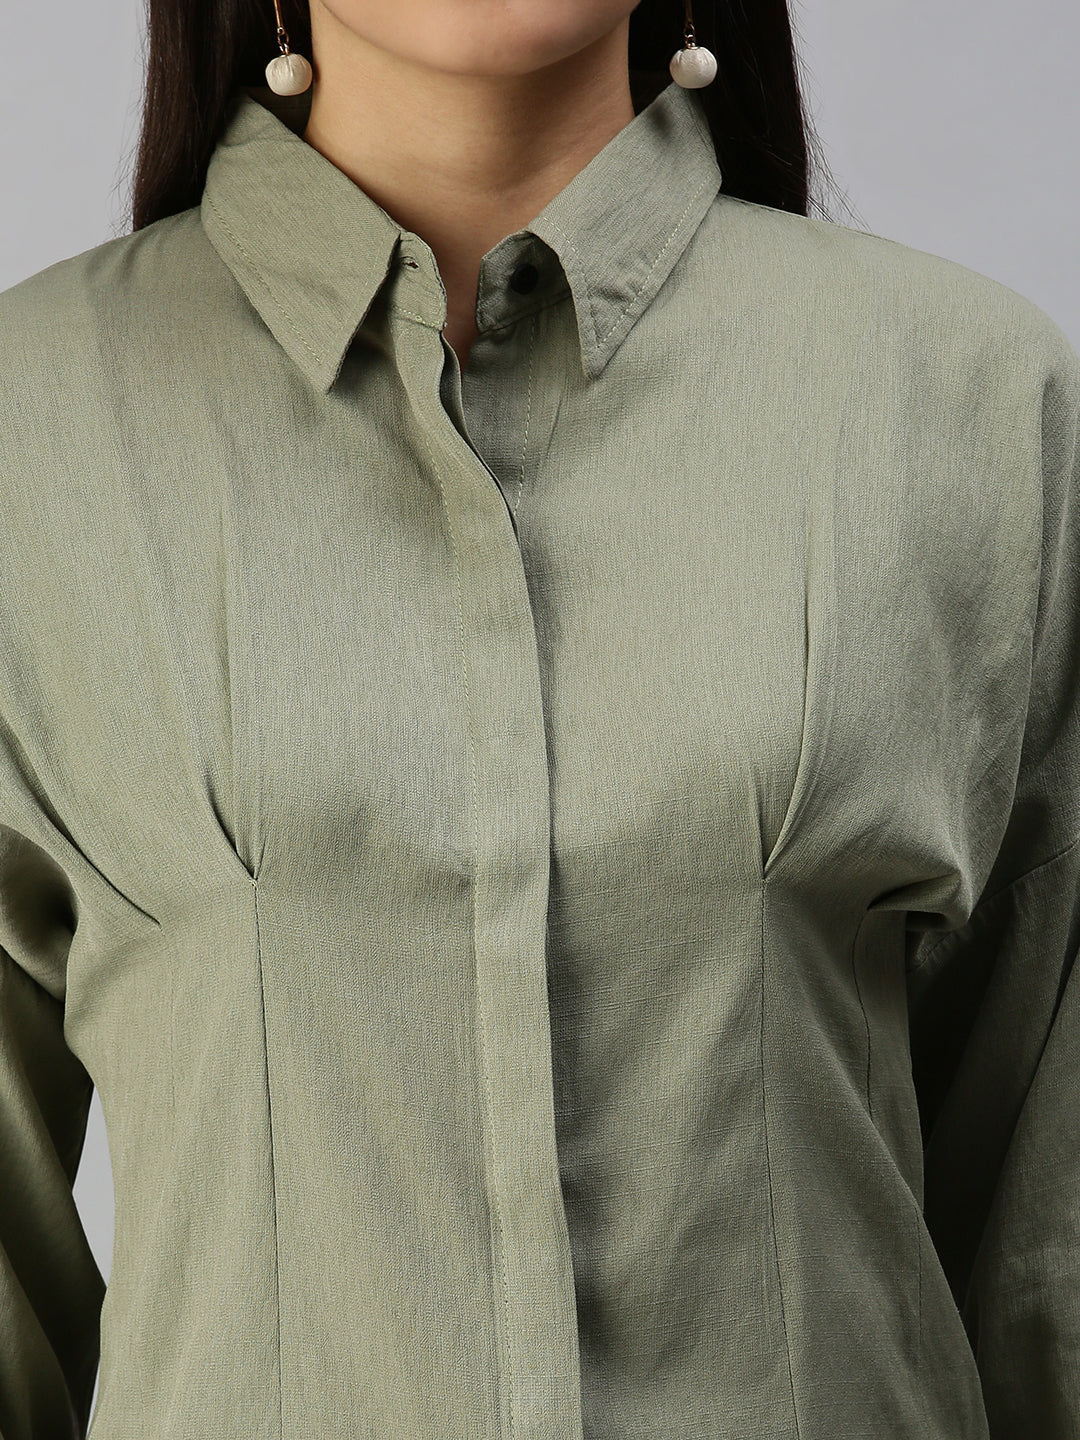 Women's Olive Solid Shirt